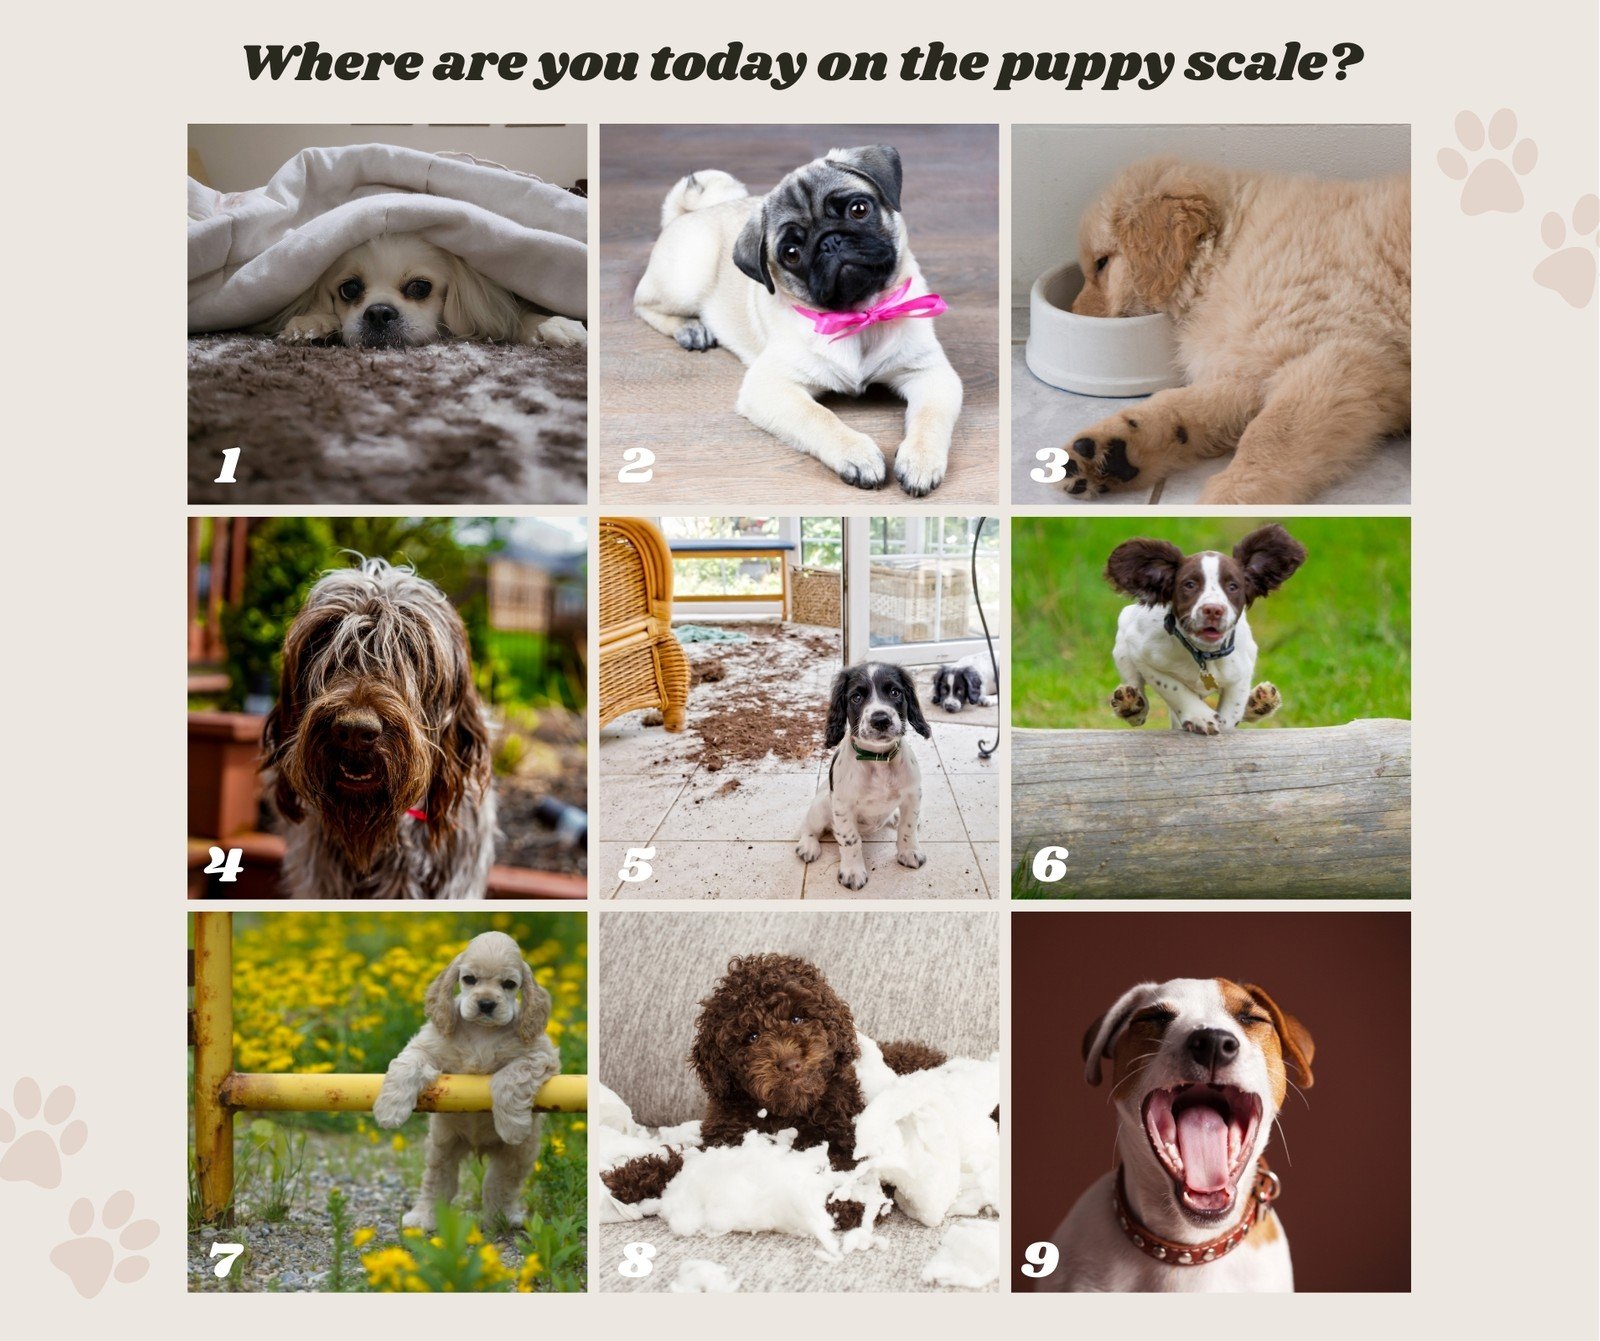 Page 12 - Free and customizable dog templates